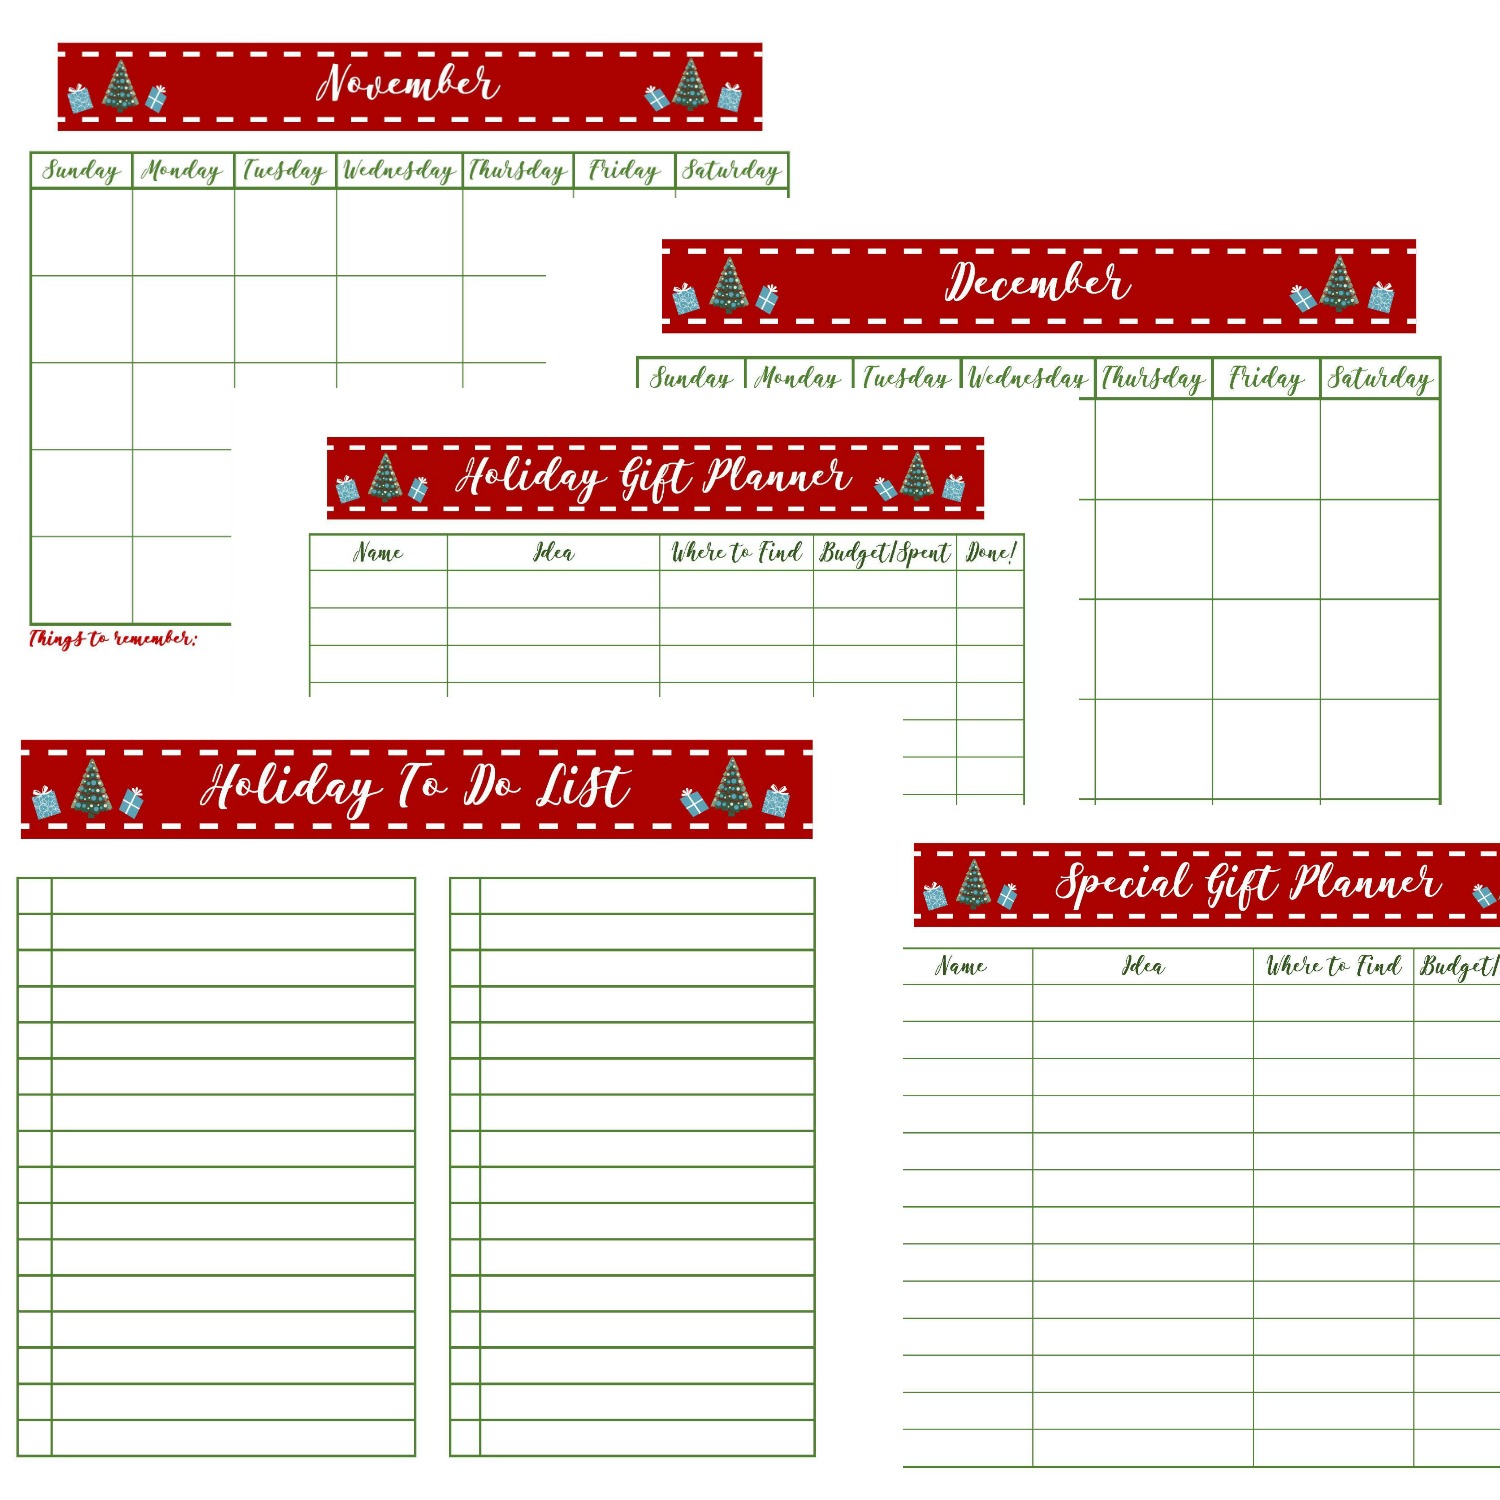 Get Organized for Christmas with Free Printable Holiday Planners